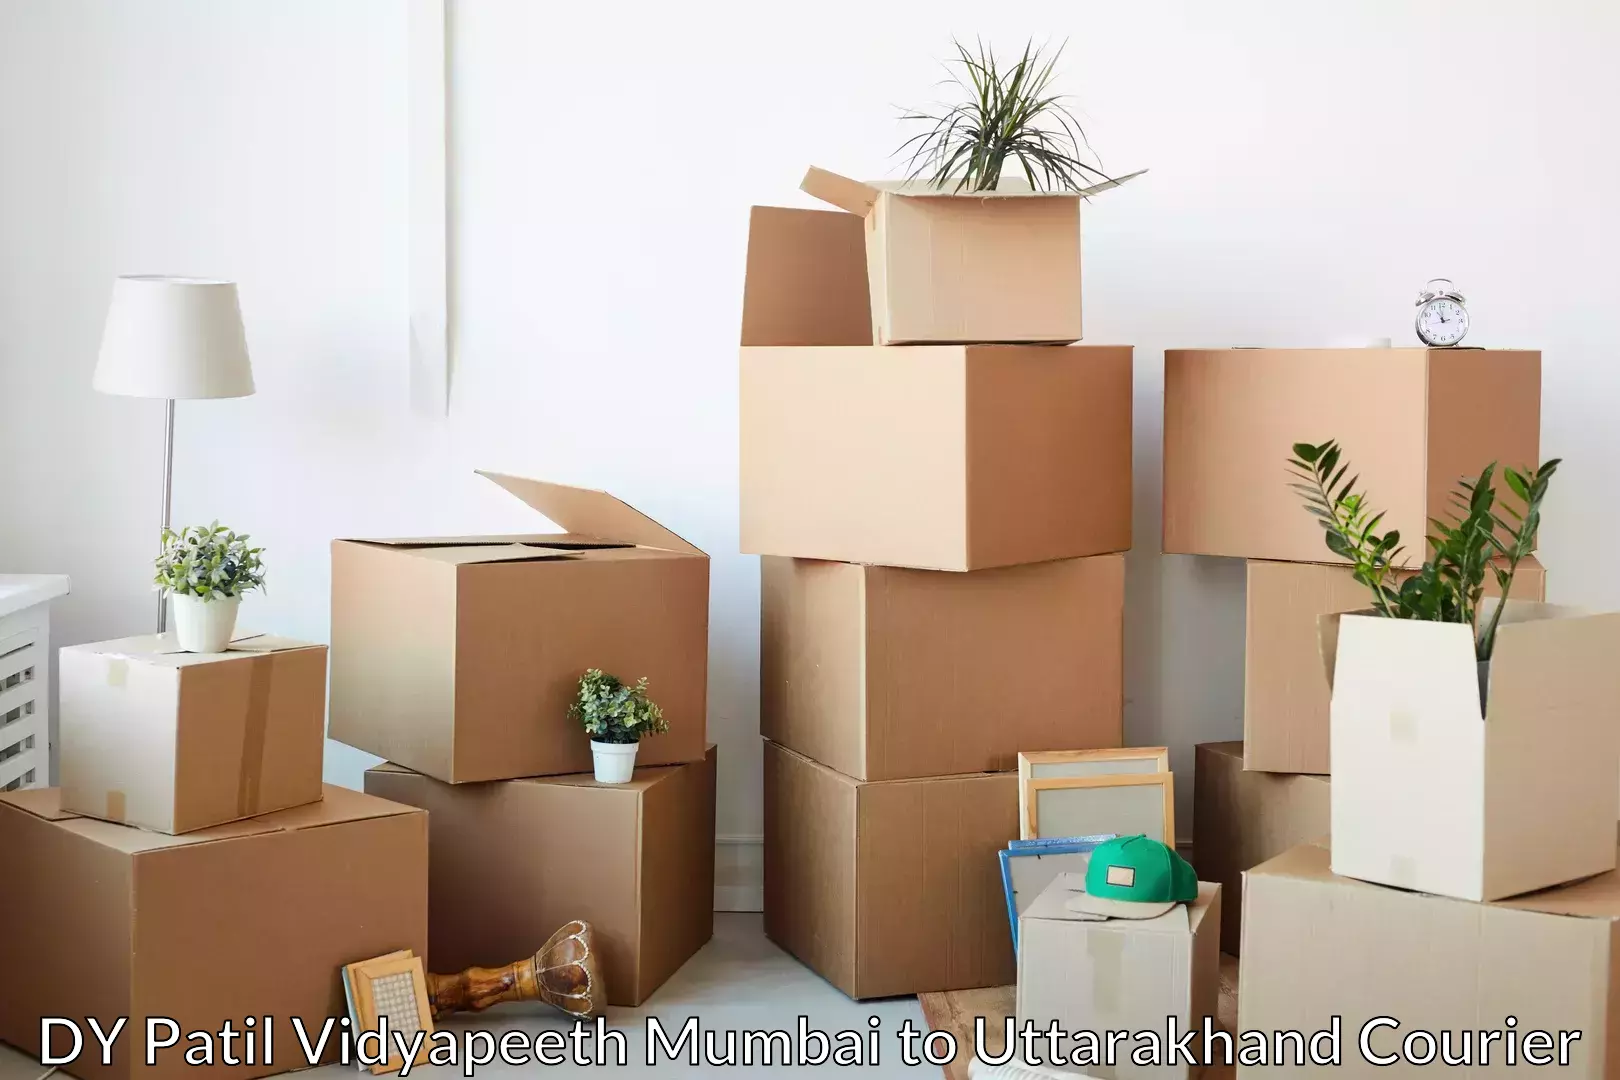 Personalized moving and storage in DY Patil Vidyapeeth Mumbai to Dehradun